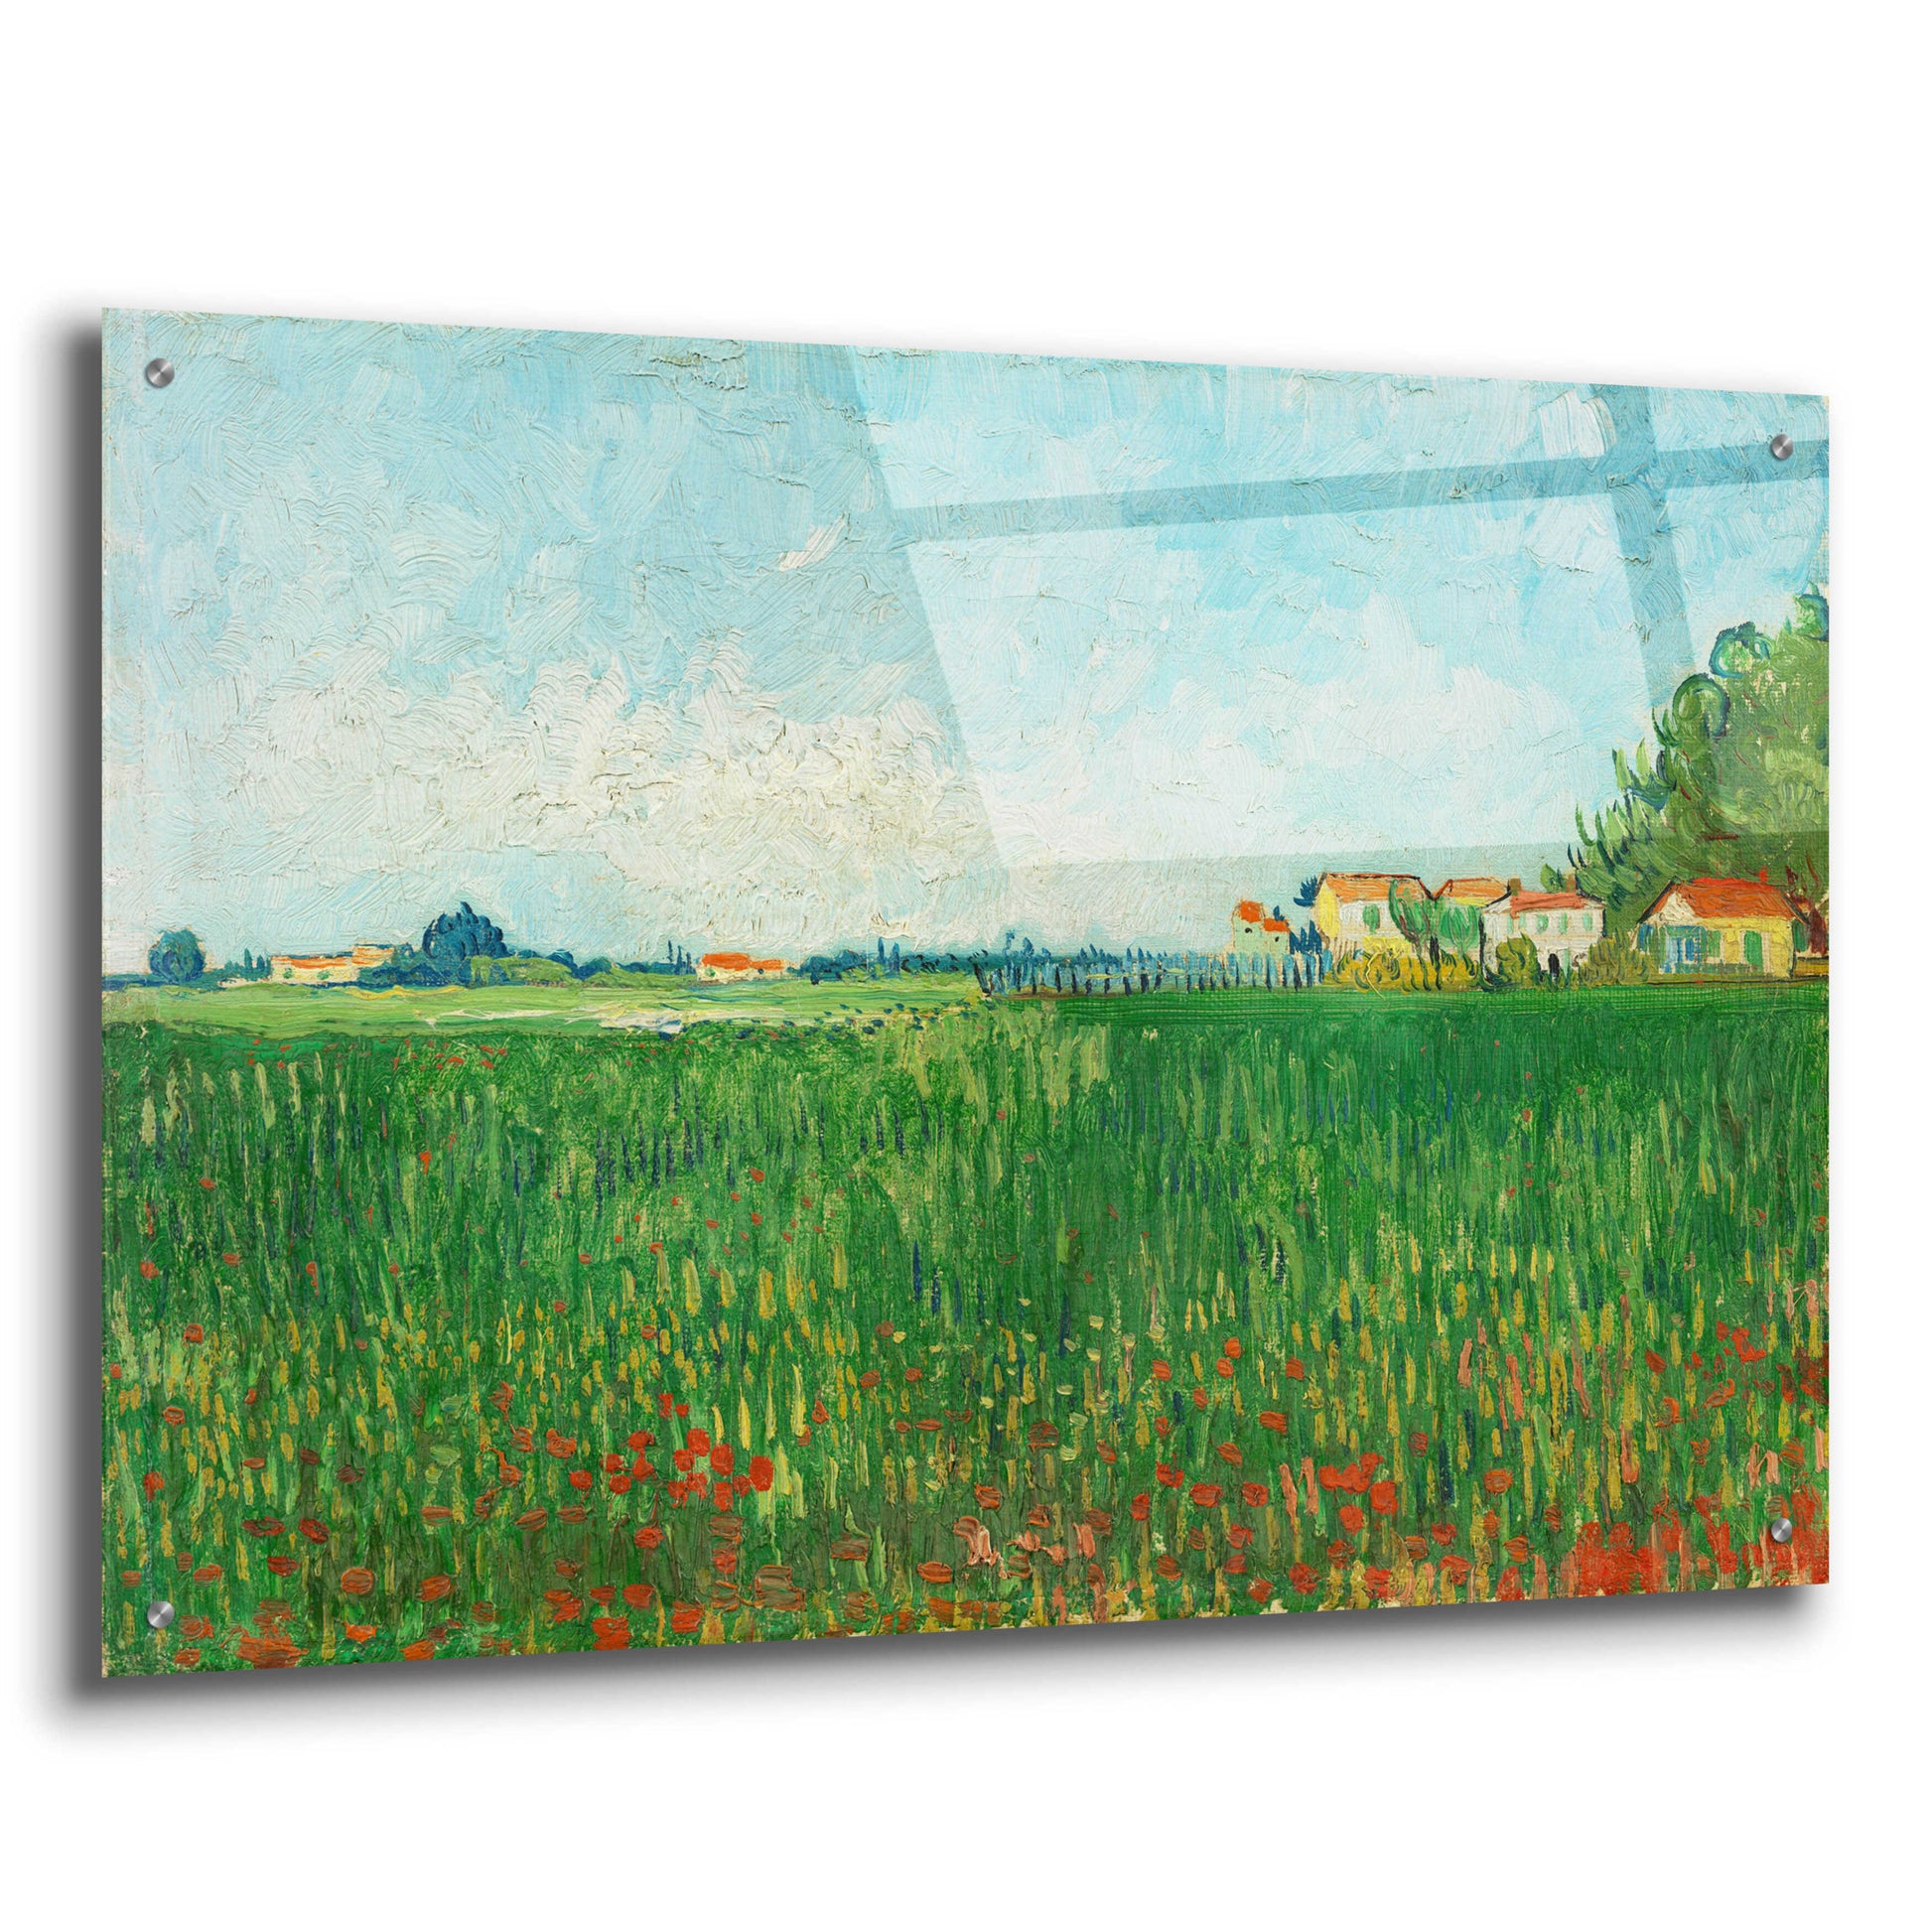 Epic Art 'Field With Poppies' by Vincent Van Gogh, Acrylic Glass Wall Art,36x24